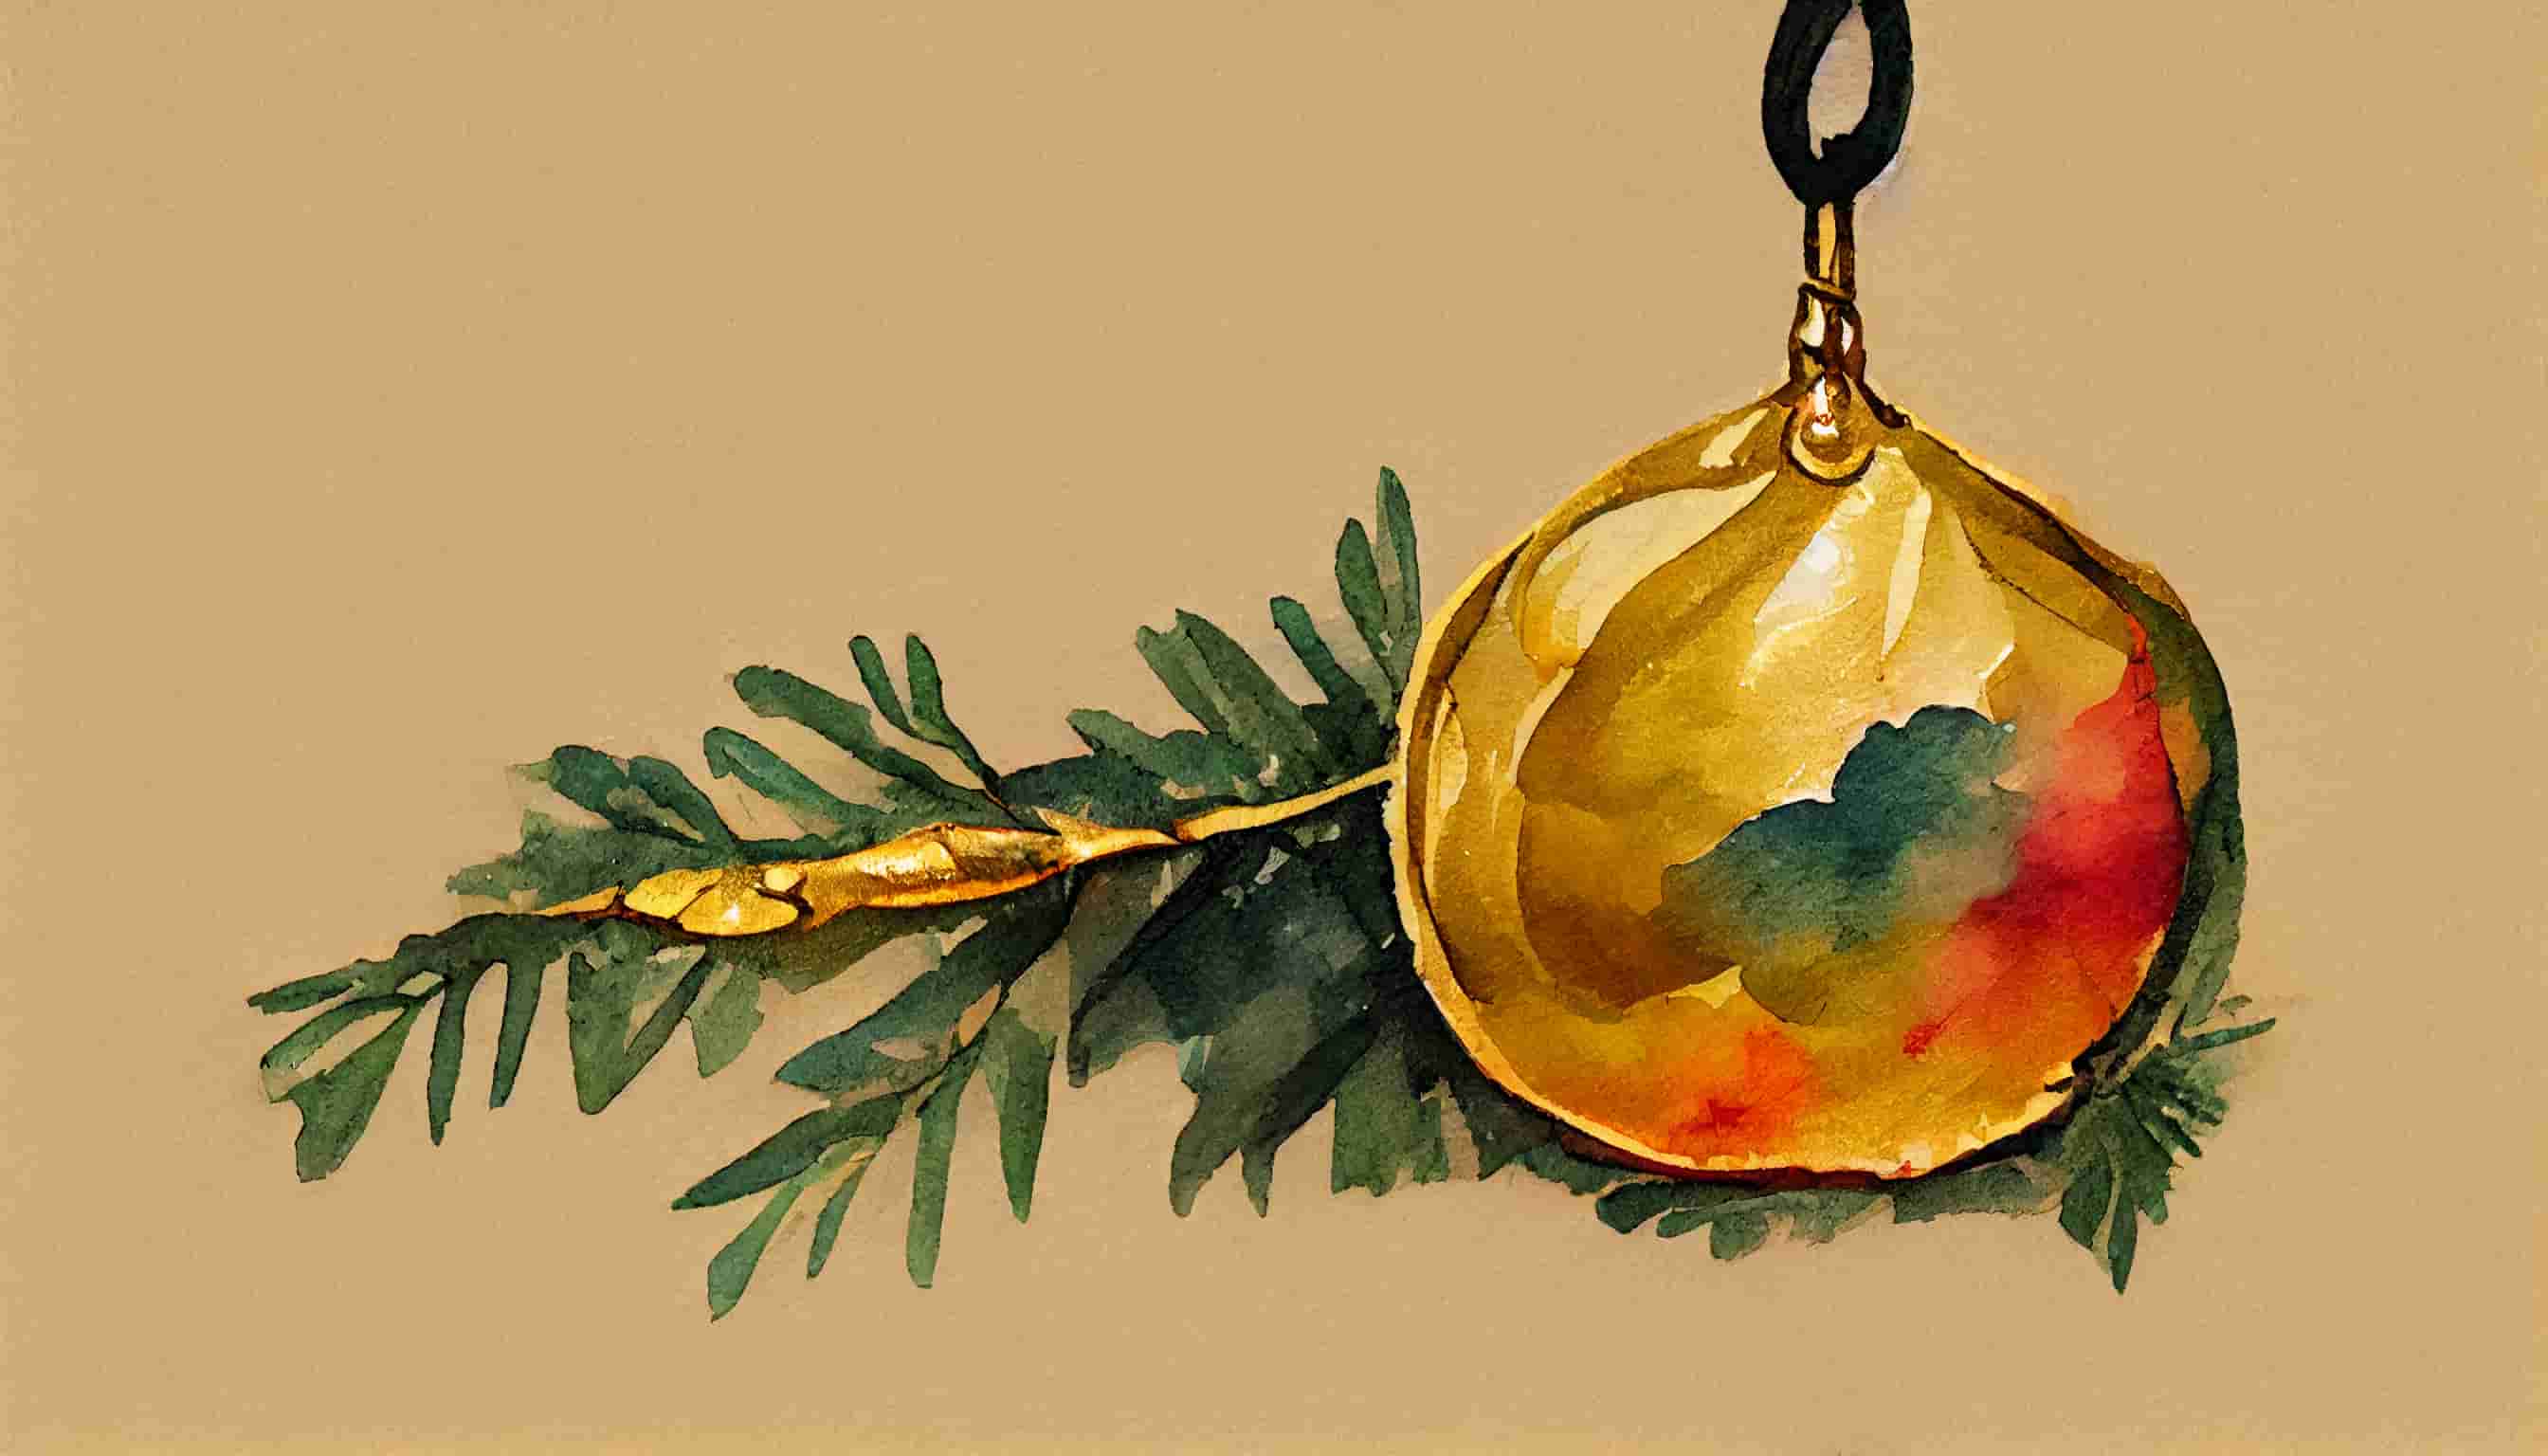 watercolor of a single gold ornament hanging from the branch of a Christmas tree